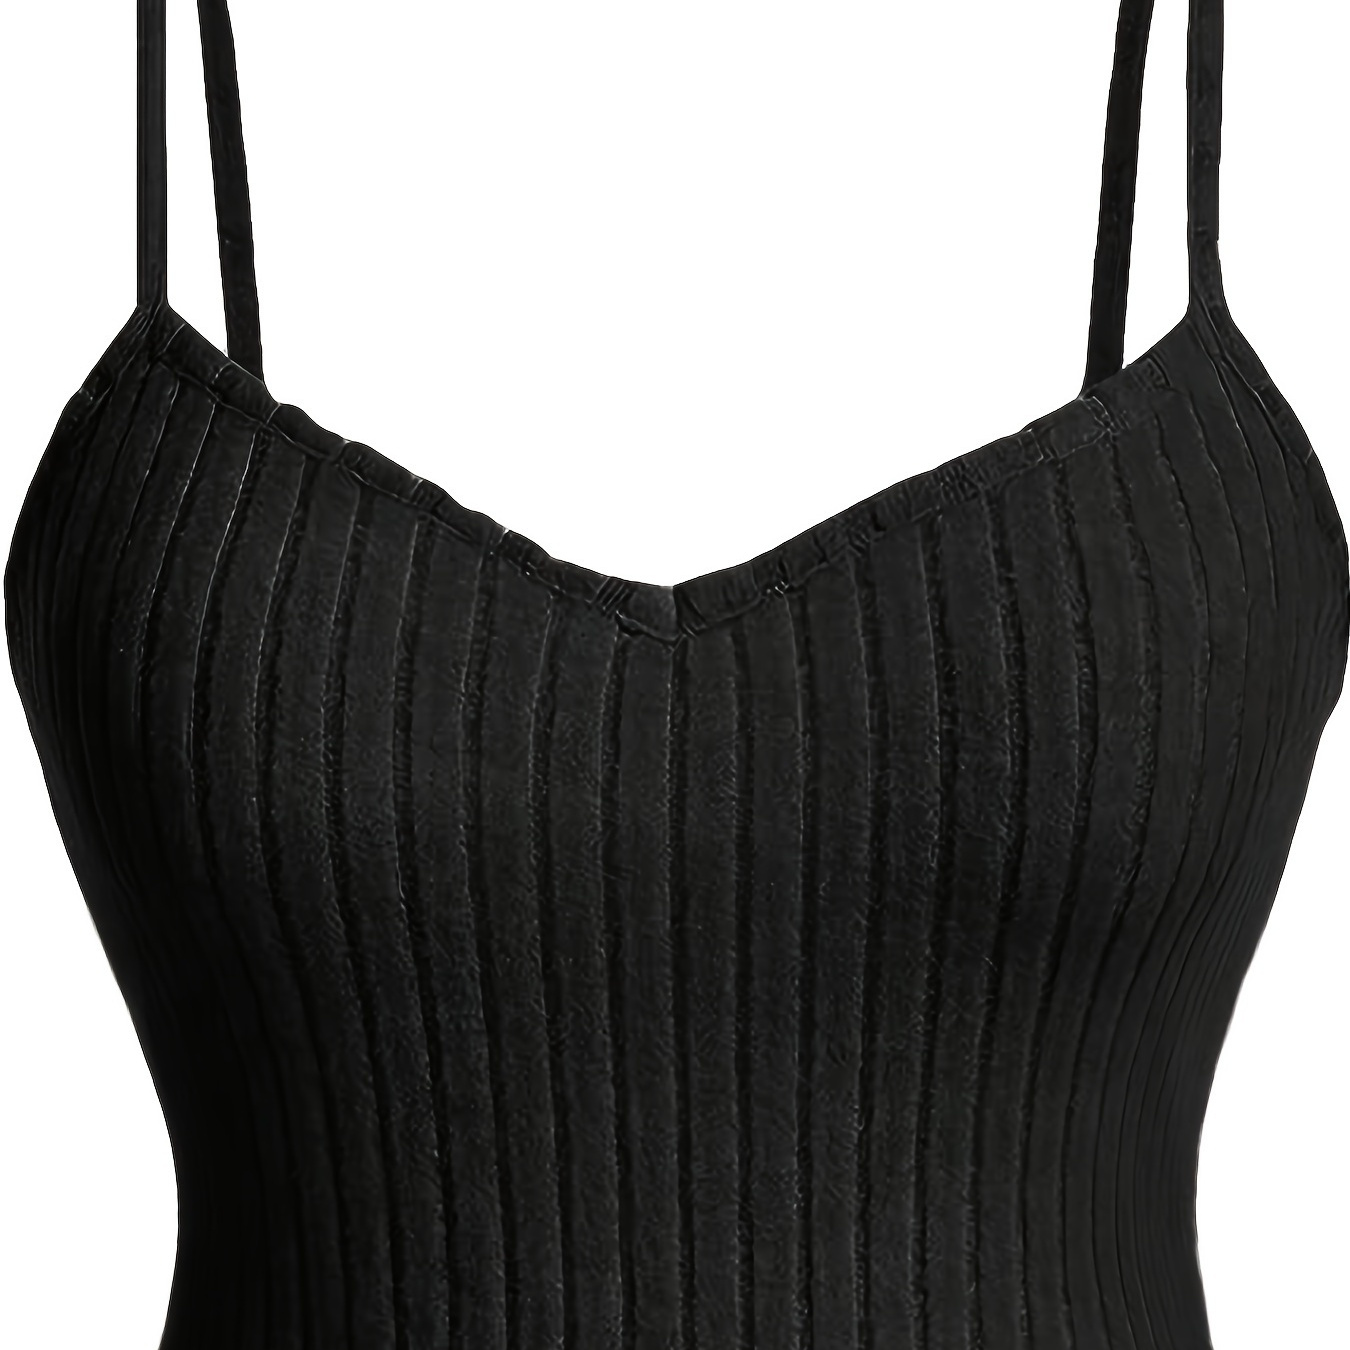 

Women's Crop Top Spaghetti Strap Tank Top - Slim Fit Sports Camisole, Stretchy Ribbed Fabric, Solid Color